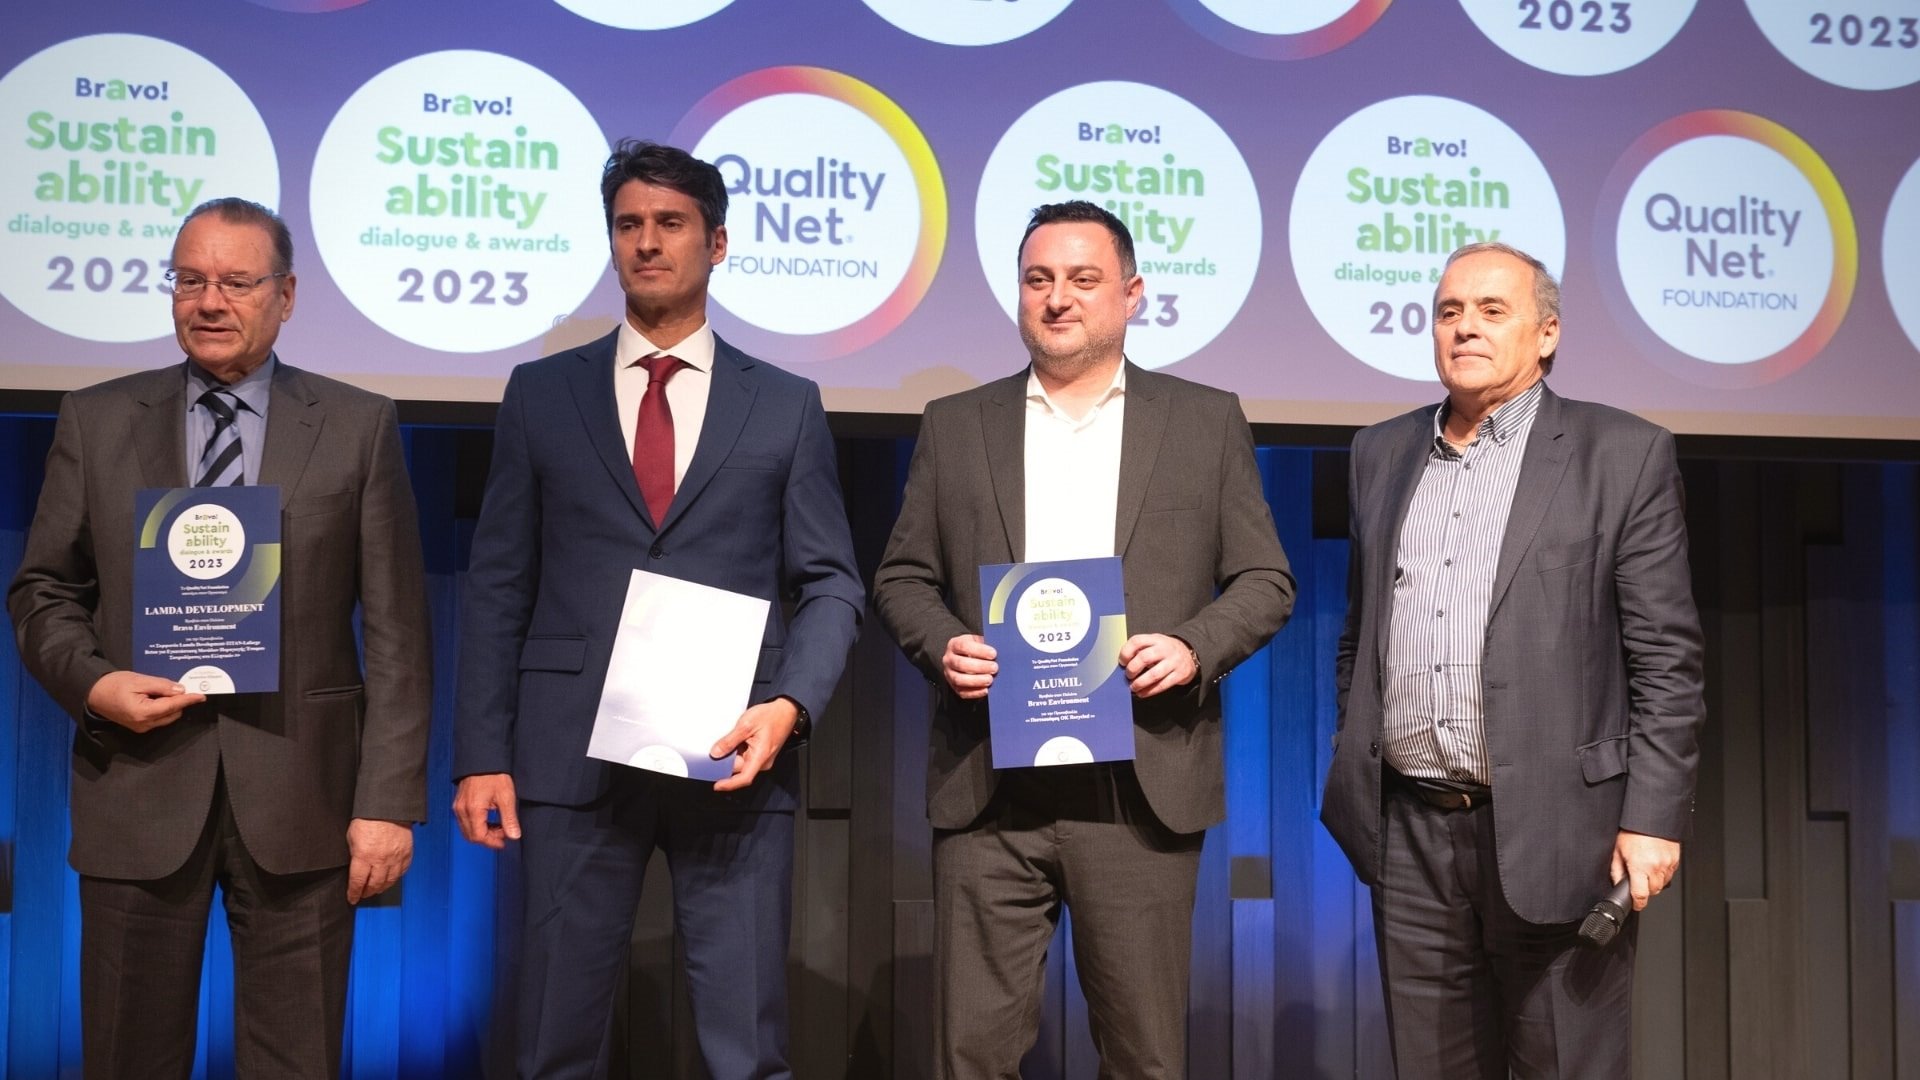 Recognition for the 3rd consecutive year at the Bravo Sustainability Dialogue & Awards 2023!